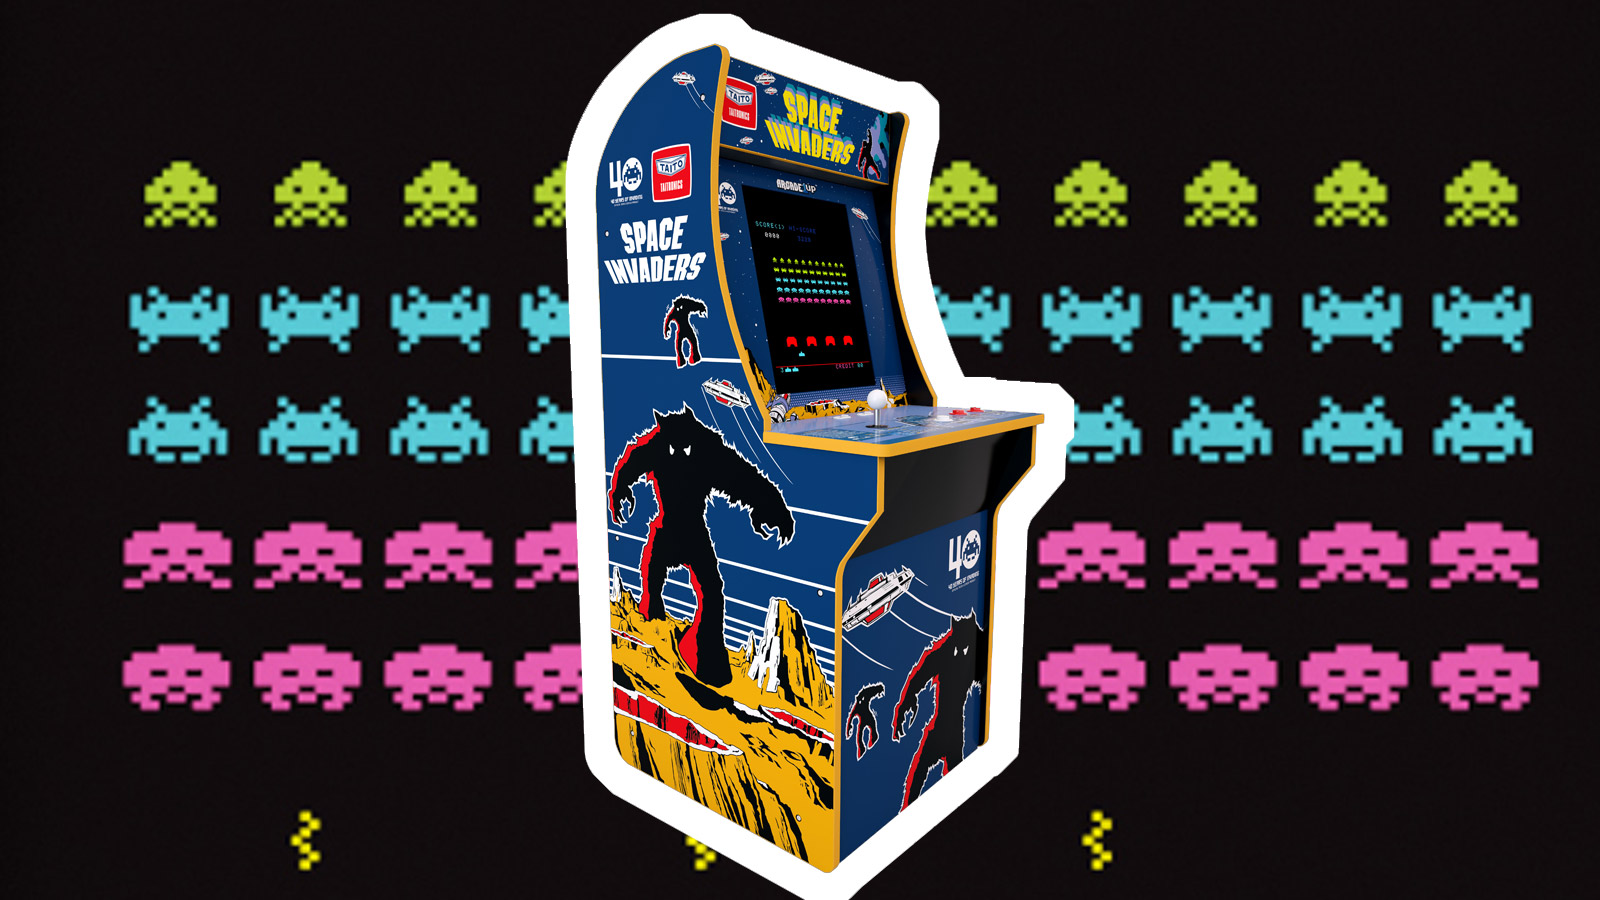 Space Invaders Arcade Machine, Arcade1UP, 4ft Arcade Cabinet is